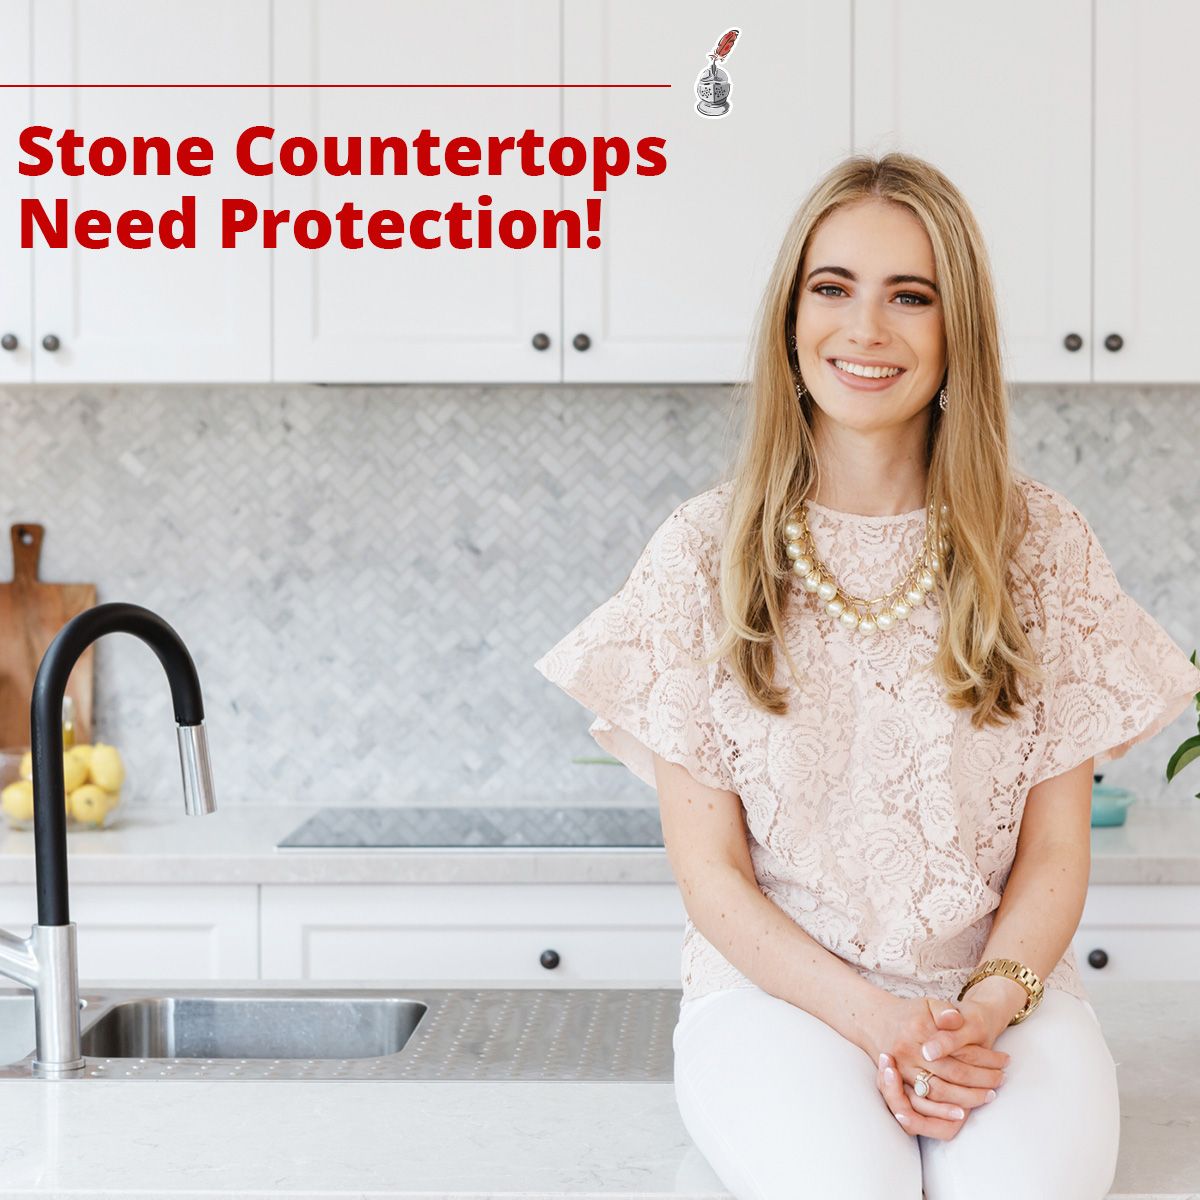 Stone Countertops Need Protection!